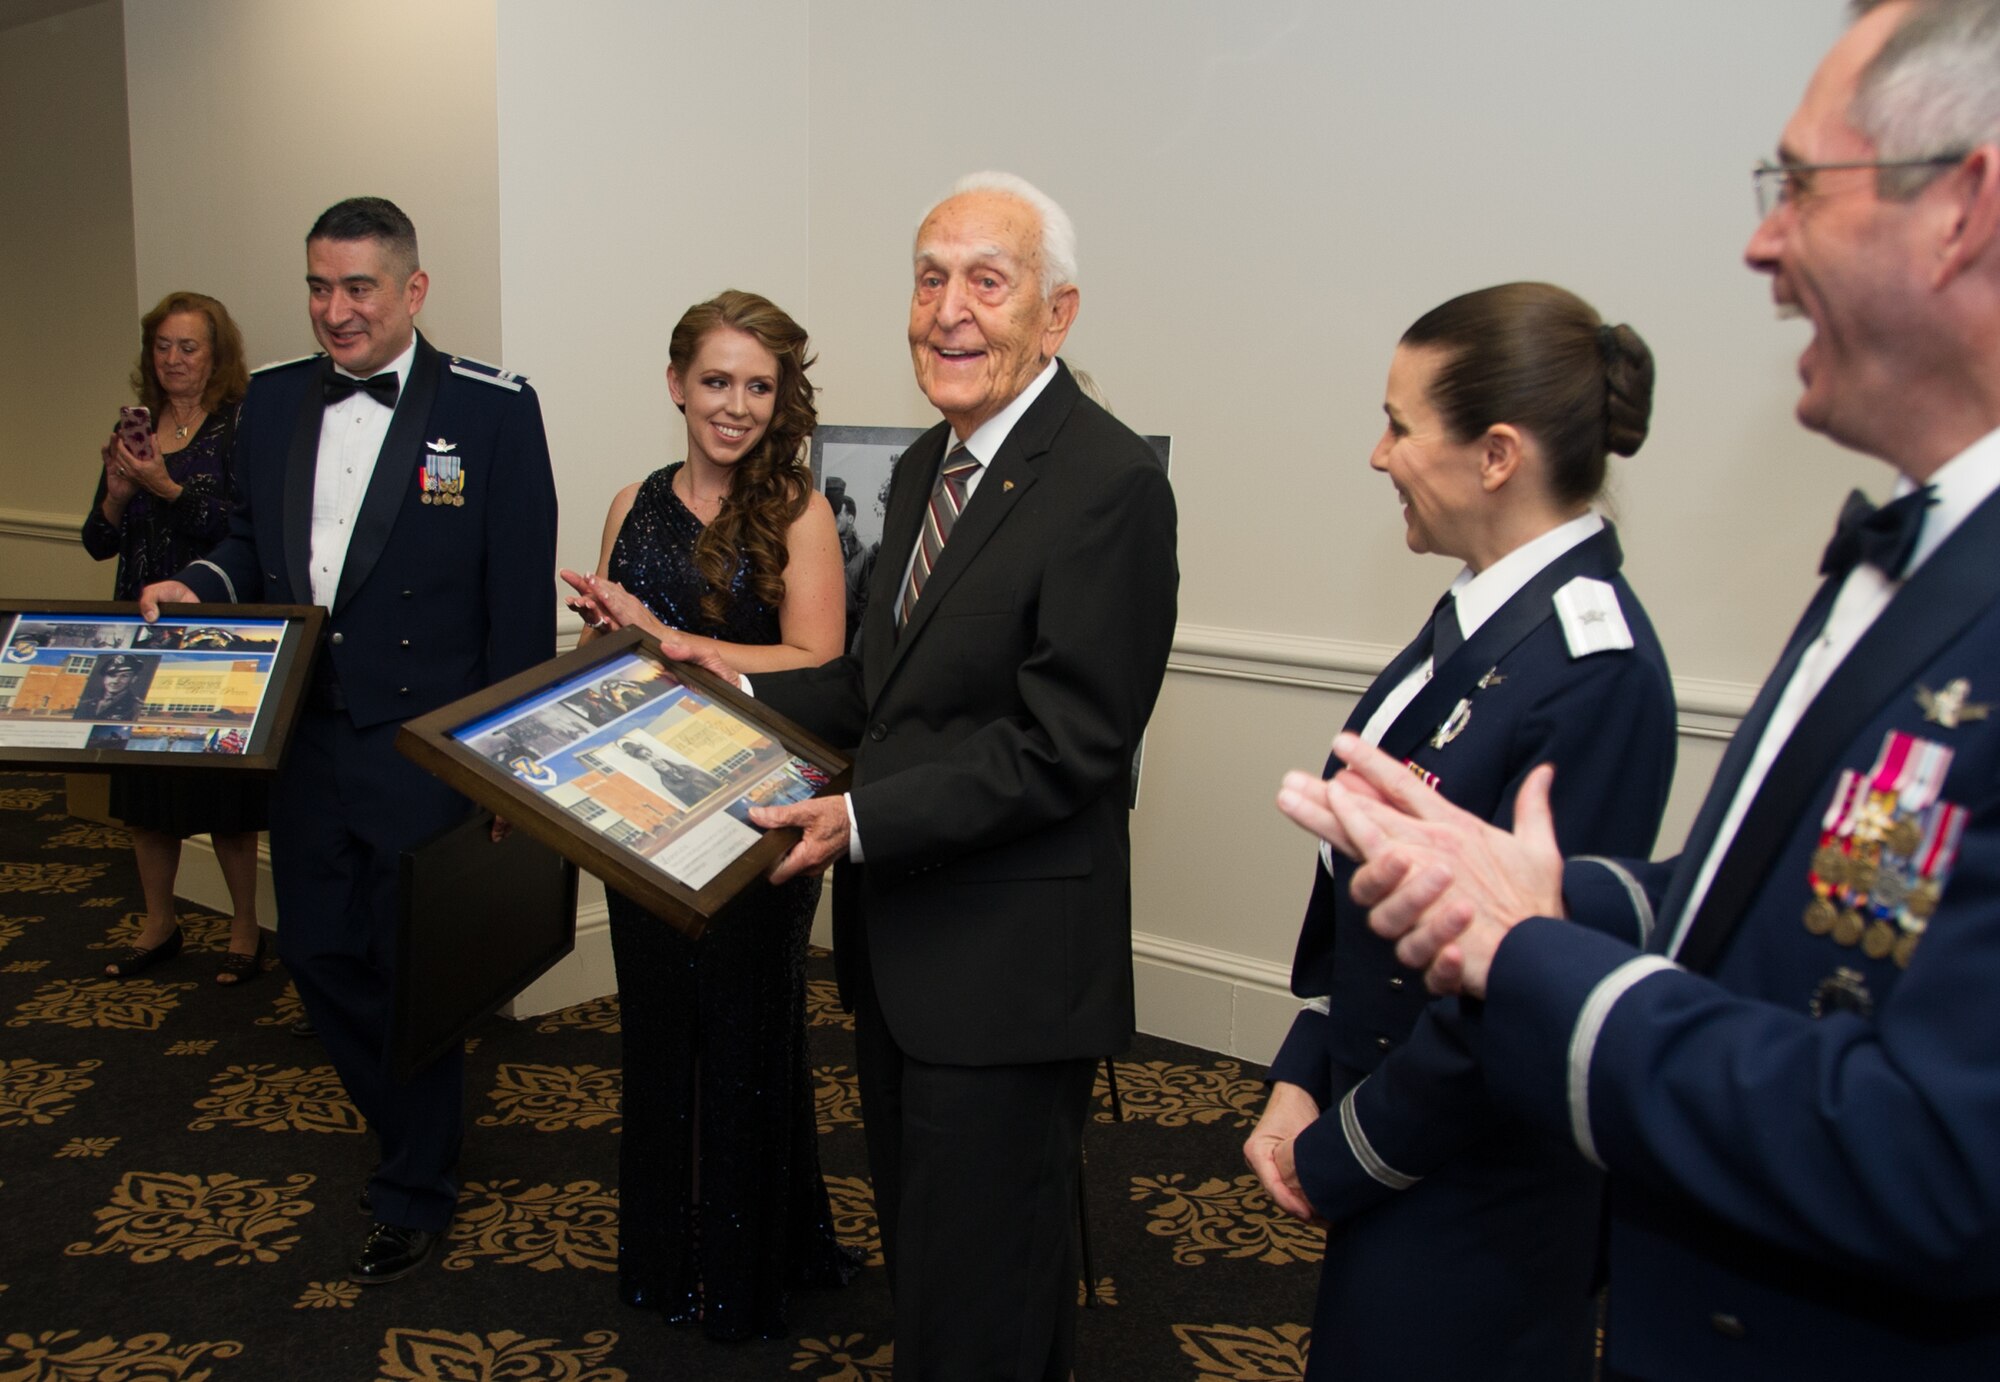 SCHRIEVER AIR FORCE BASE, Colo. -- 310th Bombardment Group alumni member, Lt. Ernest "Ernie" George LaCroix, Jr., is applauded after receiving a token of appreciation from Col. Traci Kueker-Murphy, 310th Space Wing commander, at the wing's 19th Annual Awards Banquet Saturday, Apr. 1st, 2017. The 310th Space Wing boasts a proud heritage that ties back to the Doolittle Raiders, who were members of the 310th Bombardment Group. (U.S. Air Force photo/Senior Airman Laura Turner)